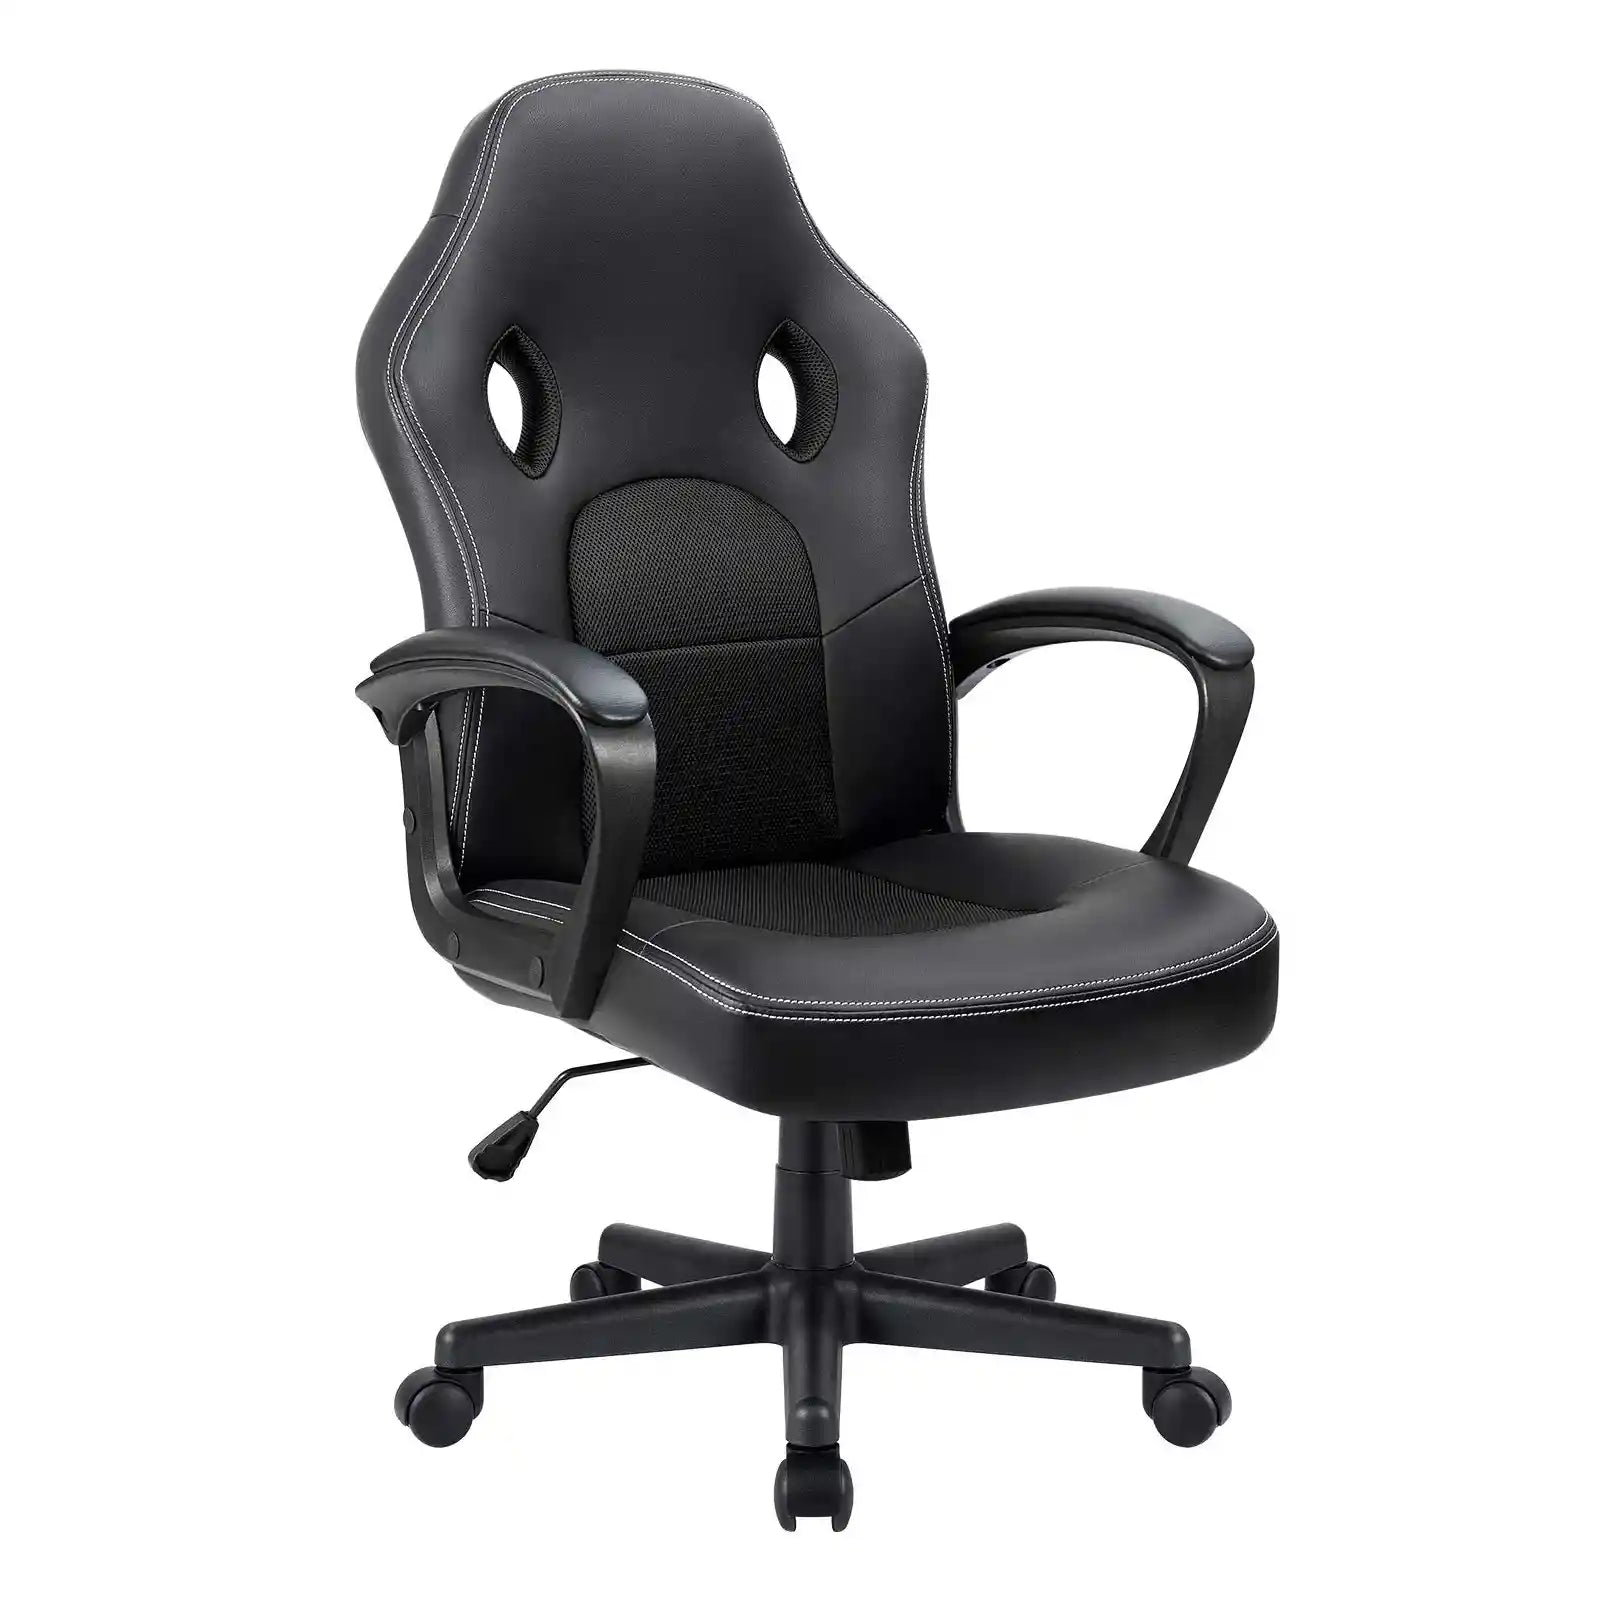 Faux Leather Computer Gaming Chair Office Desk Chair with Lumbar Support